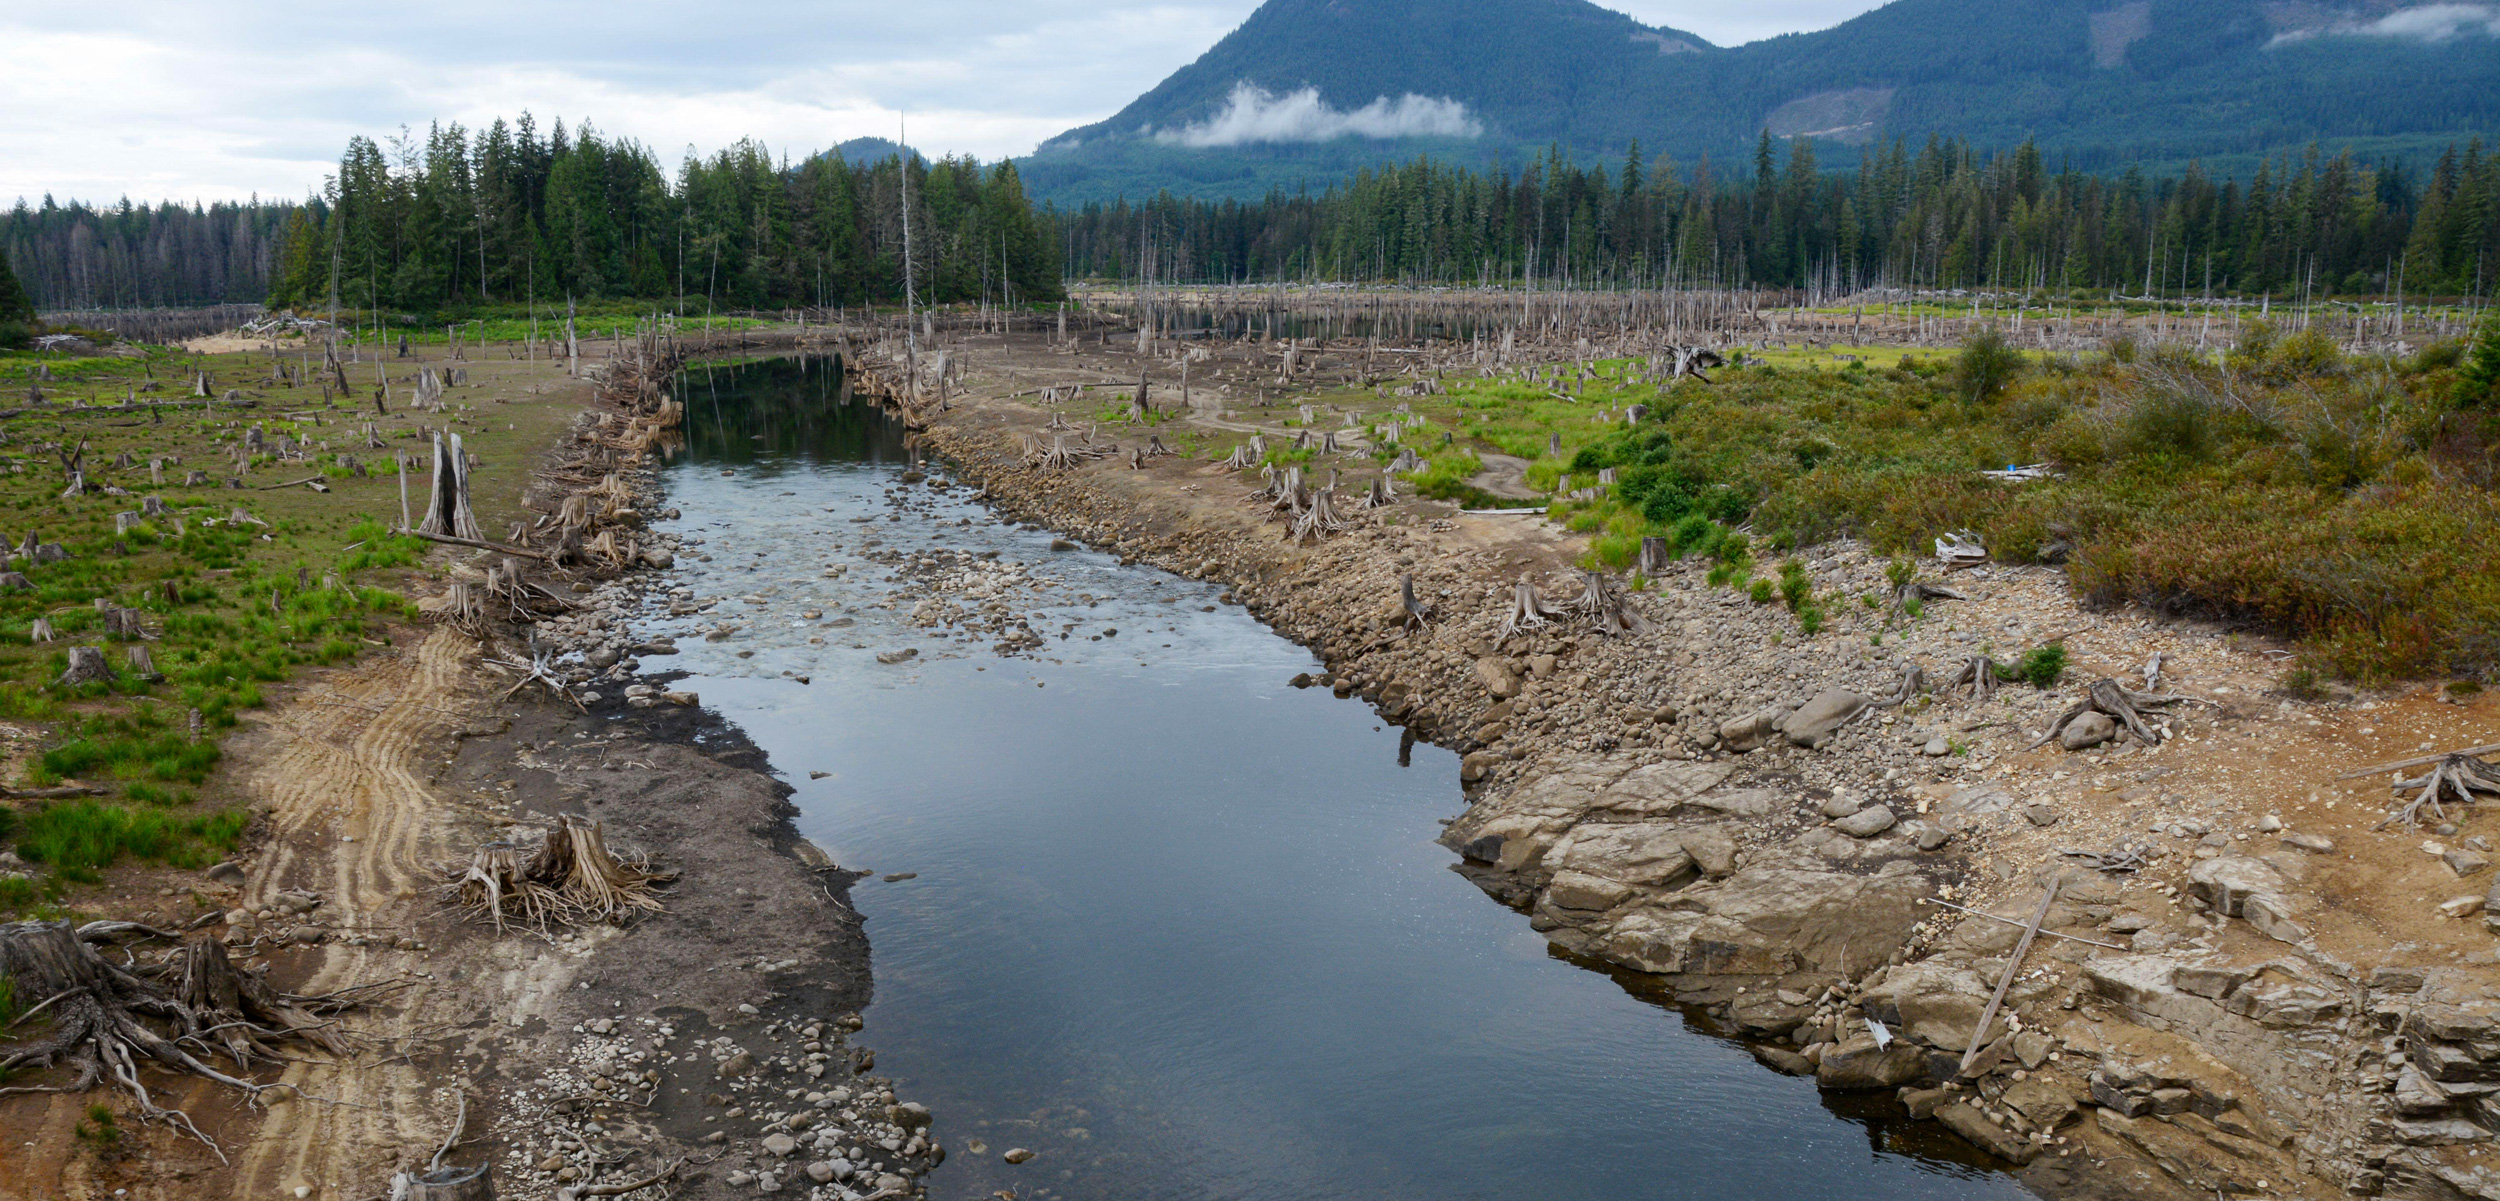 A forest landscape of clearcuts and tree stumps along a creek